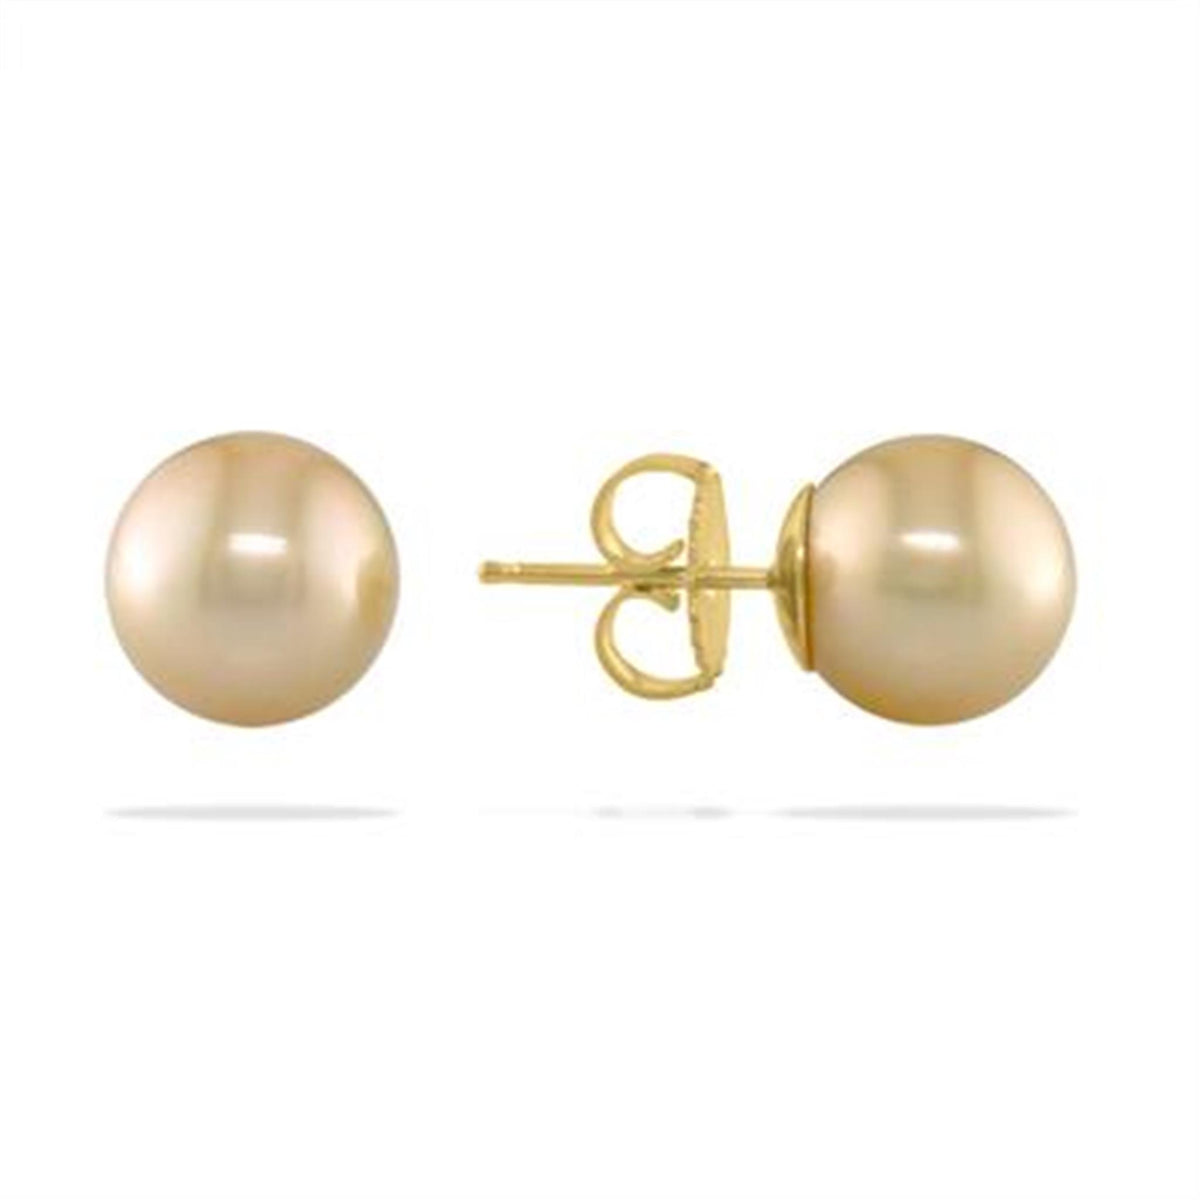 14Kt Yellow Gold Stud Earrings With 9x10 mm Golden South Sea Cultured Pearls